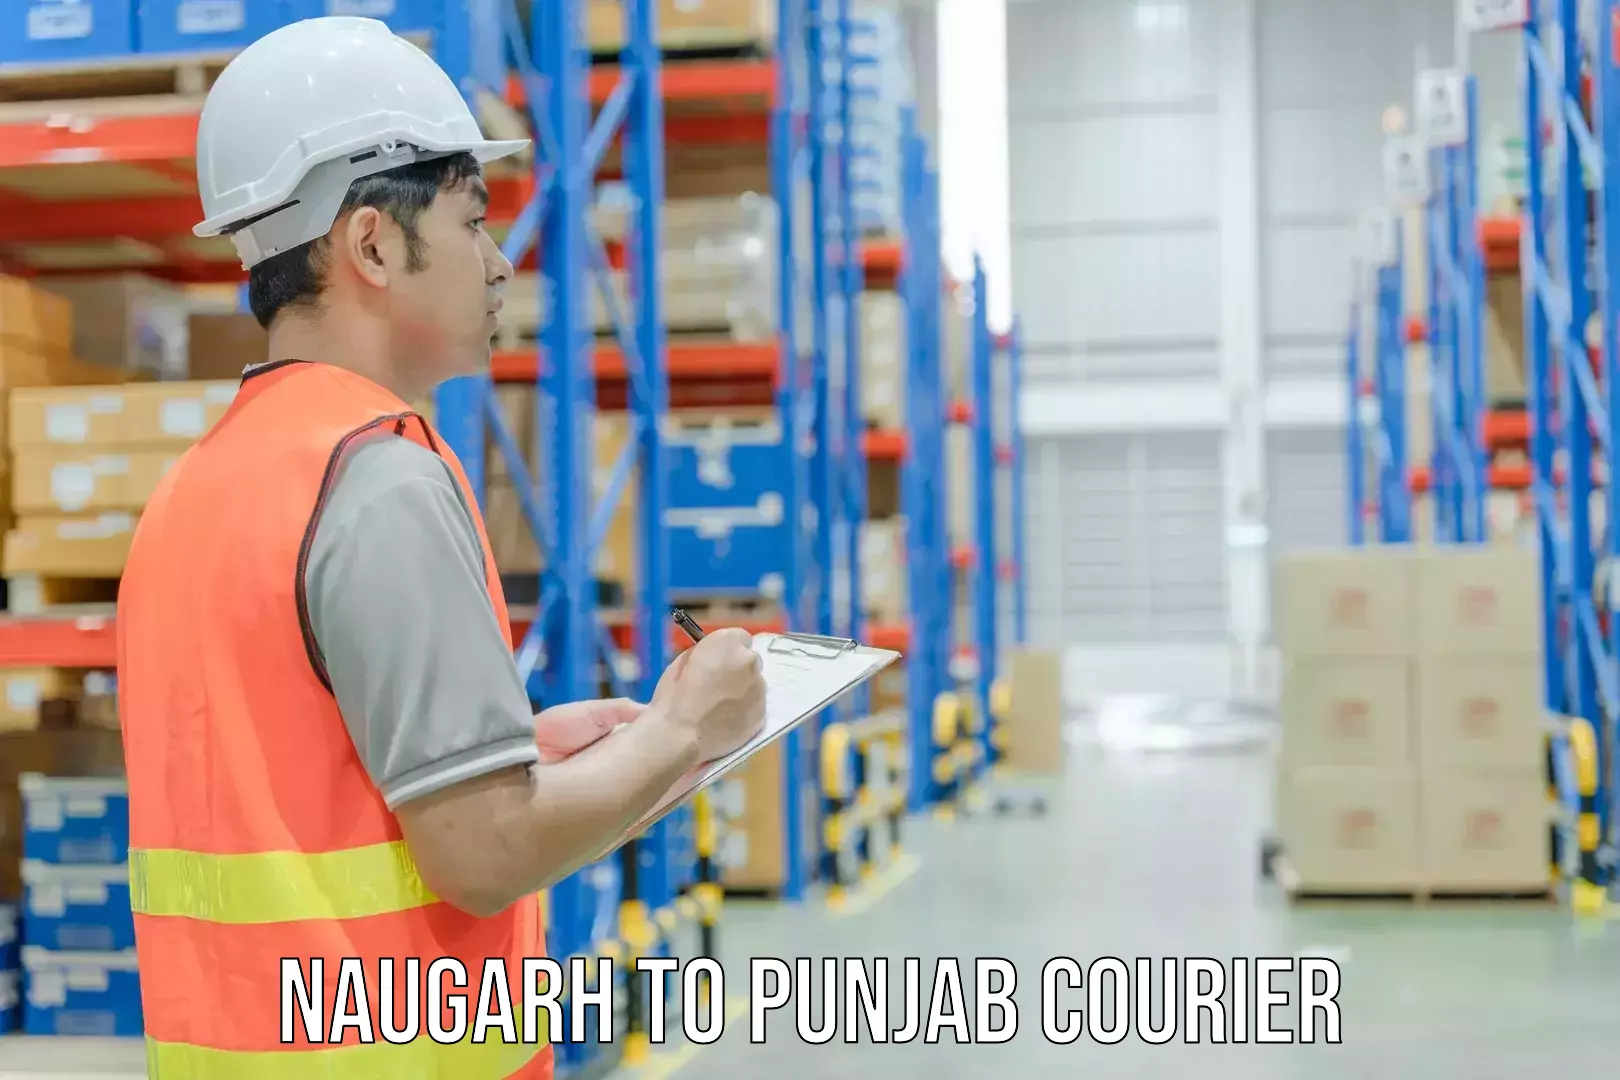 Full-service courier options Naugarh to Punjab